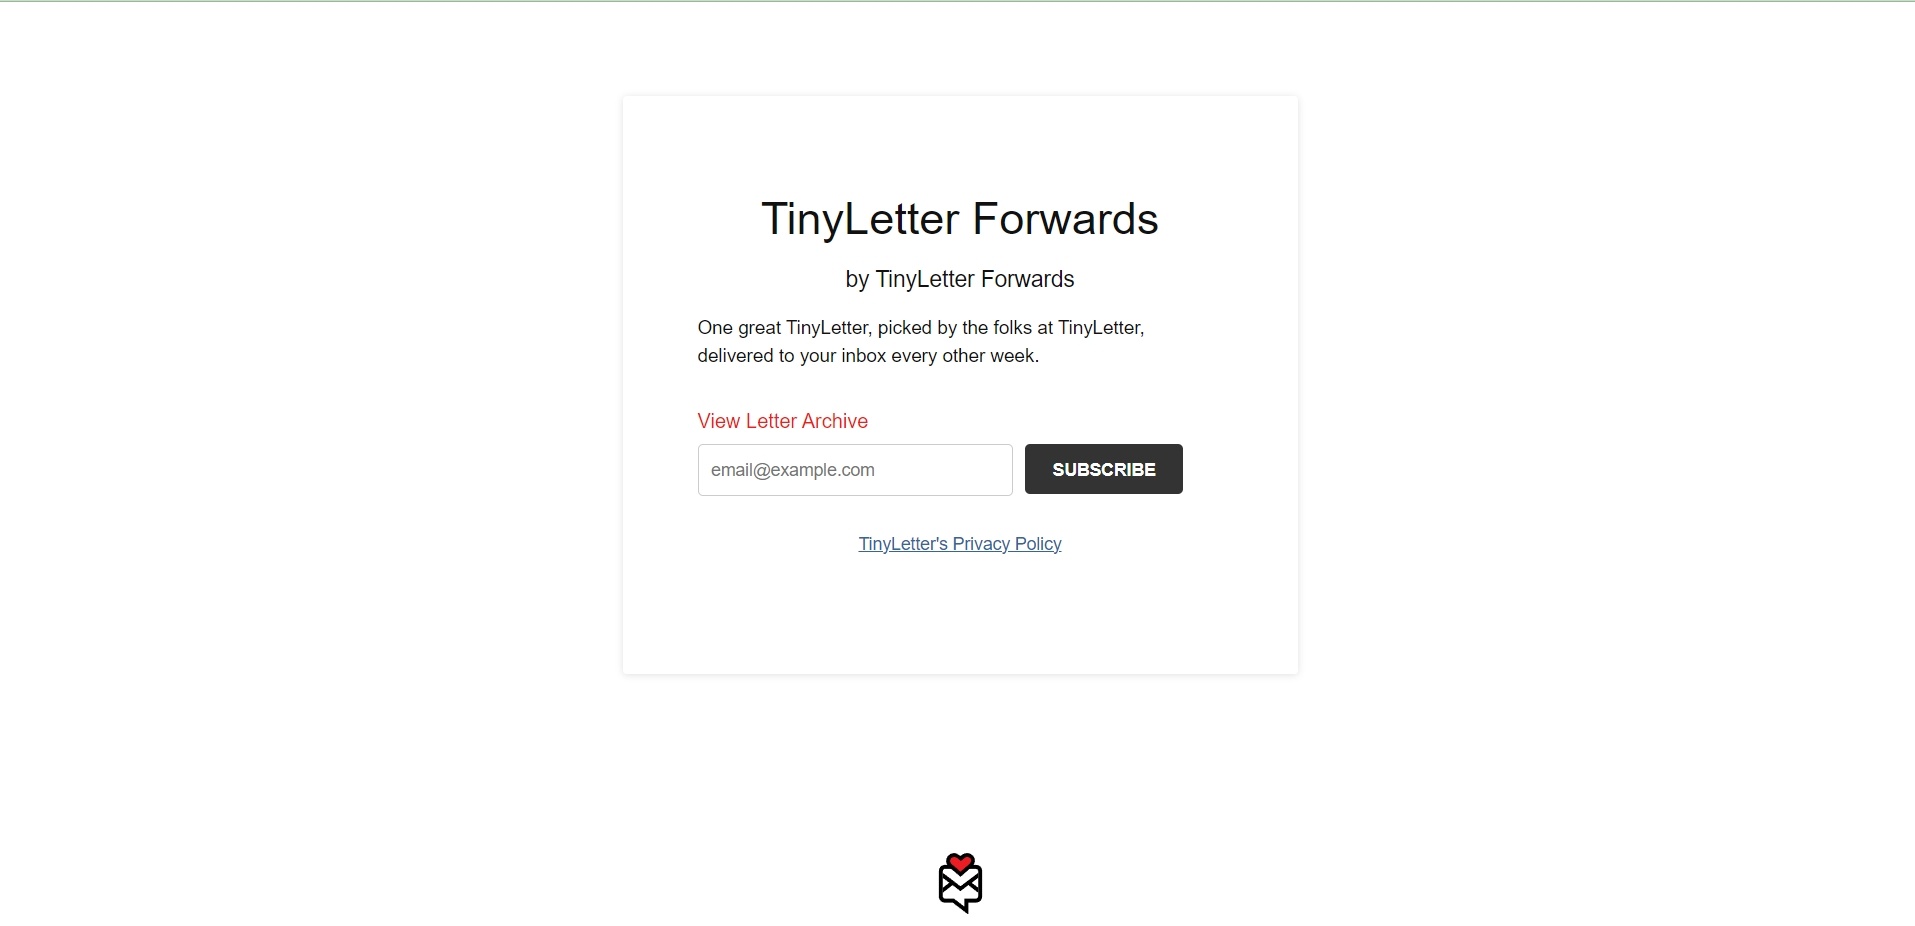 TinyLetter Forwards email sign up form, another one of our examples